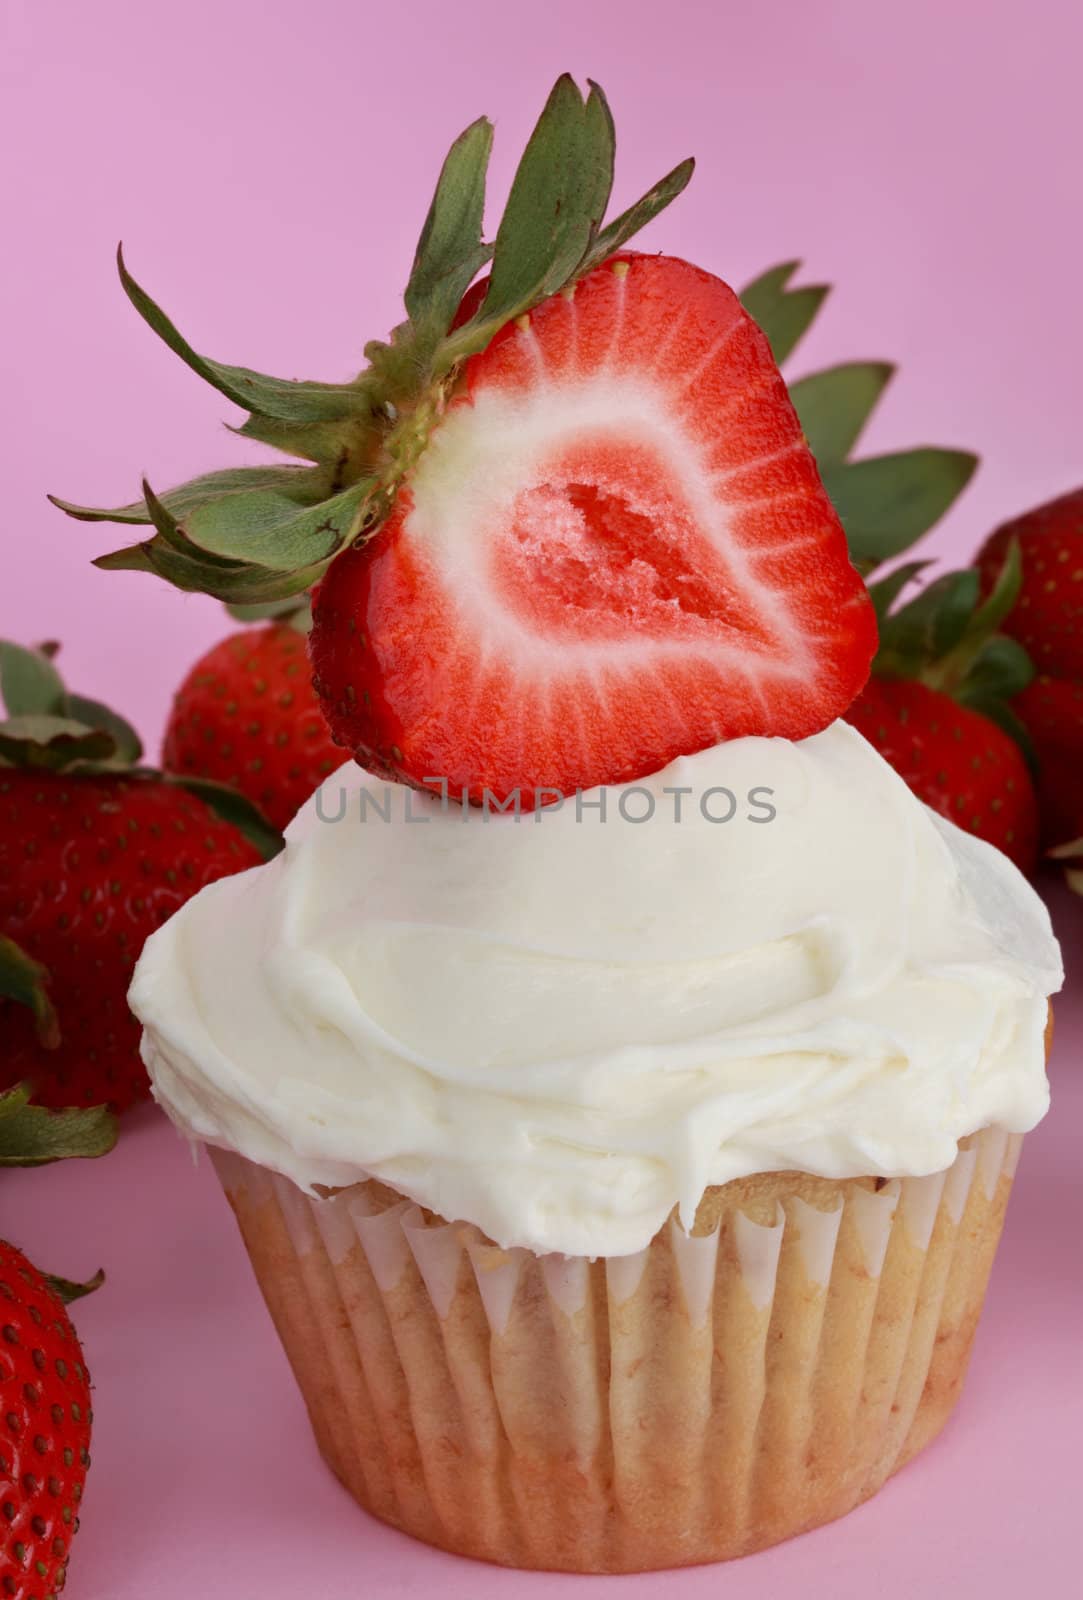 cupcake with strawberry by lanalanglois